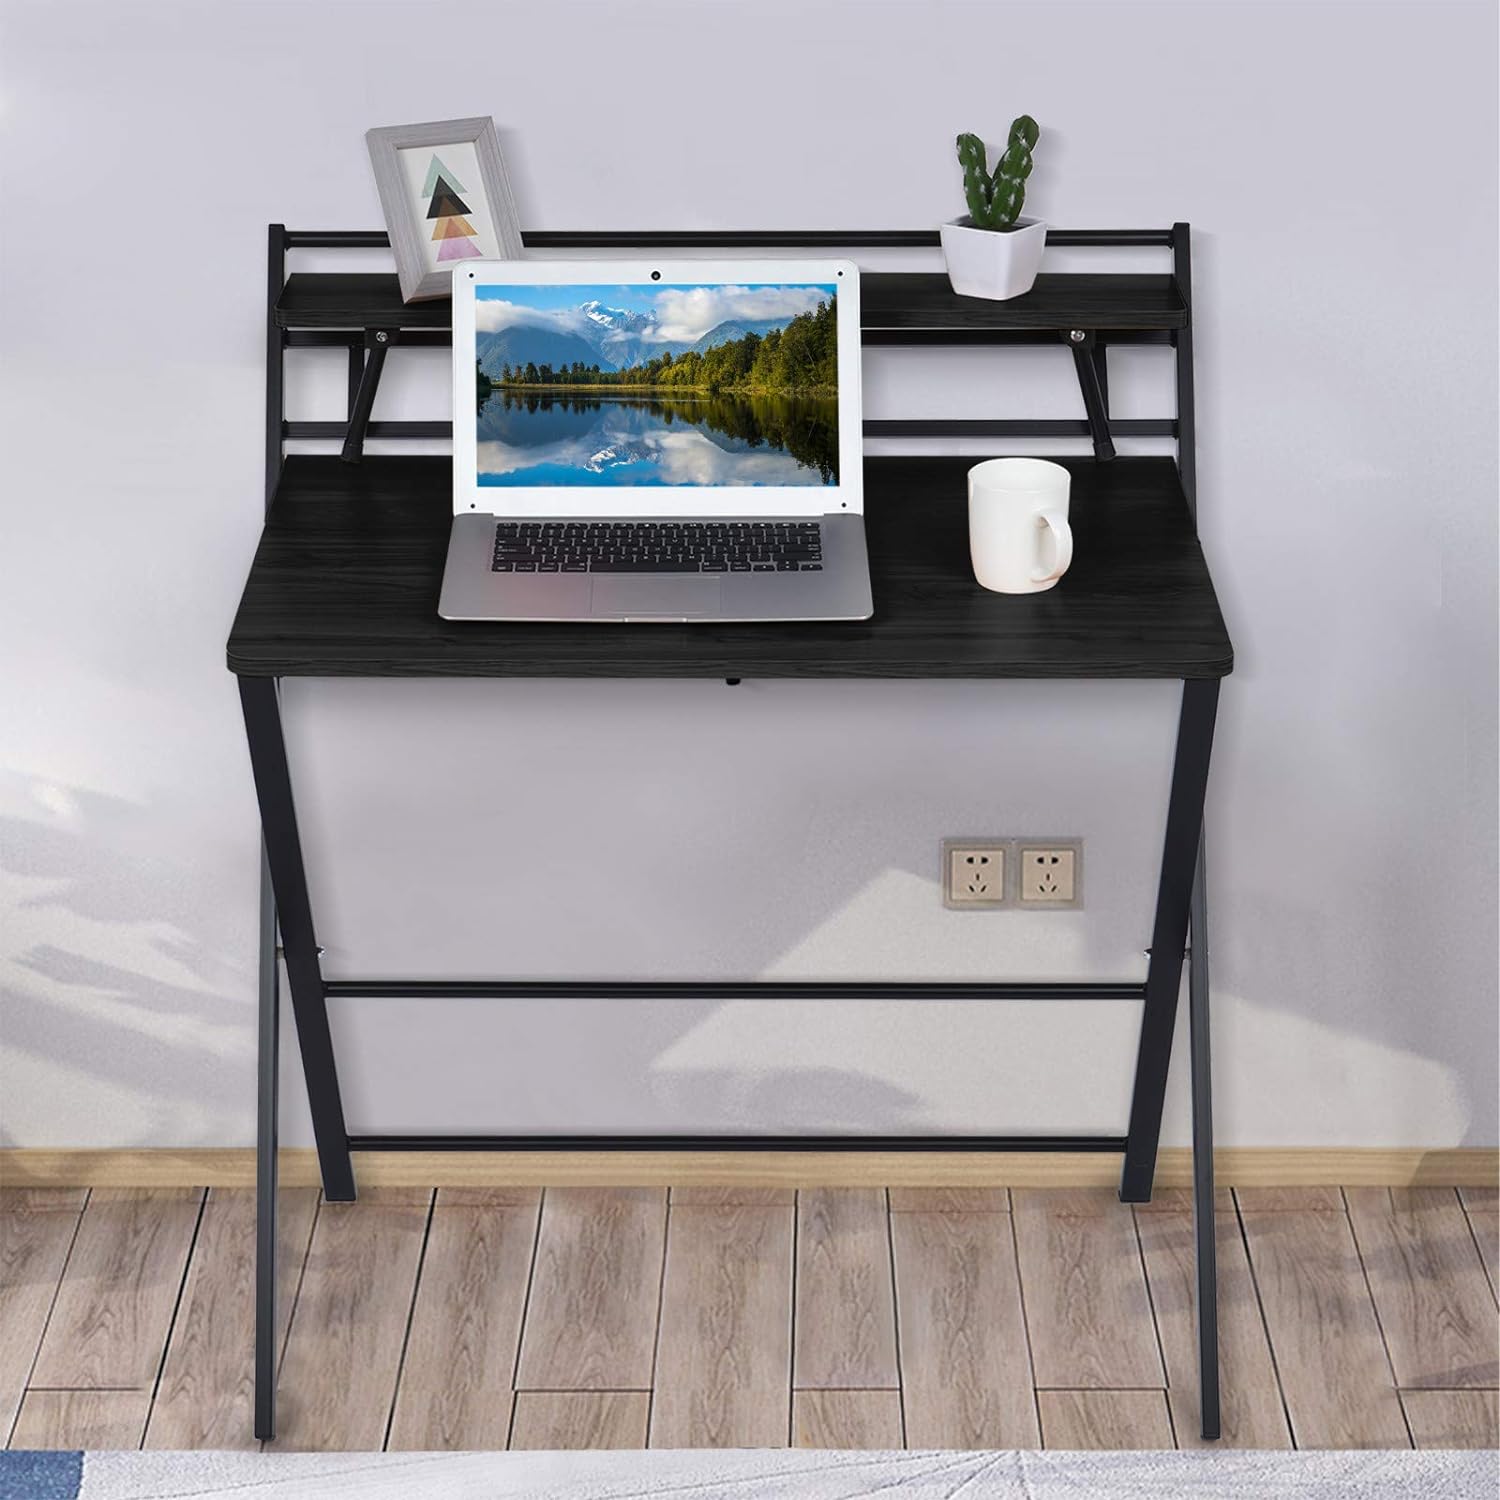 

Folding Desk No Assembly Required, Computer Desk Writing Student And Home Office Organization With 2-tier Modern Shelf Foldable Table Workstation For Small Spaces 32.919.7, Black